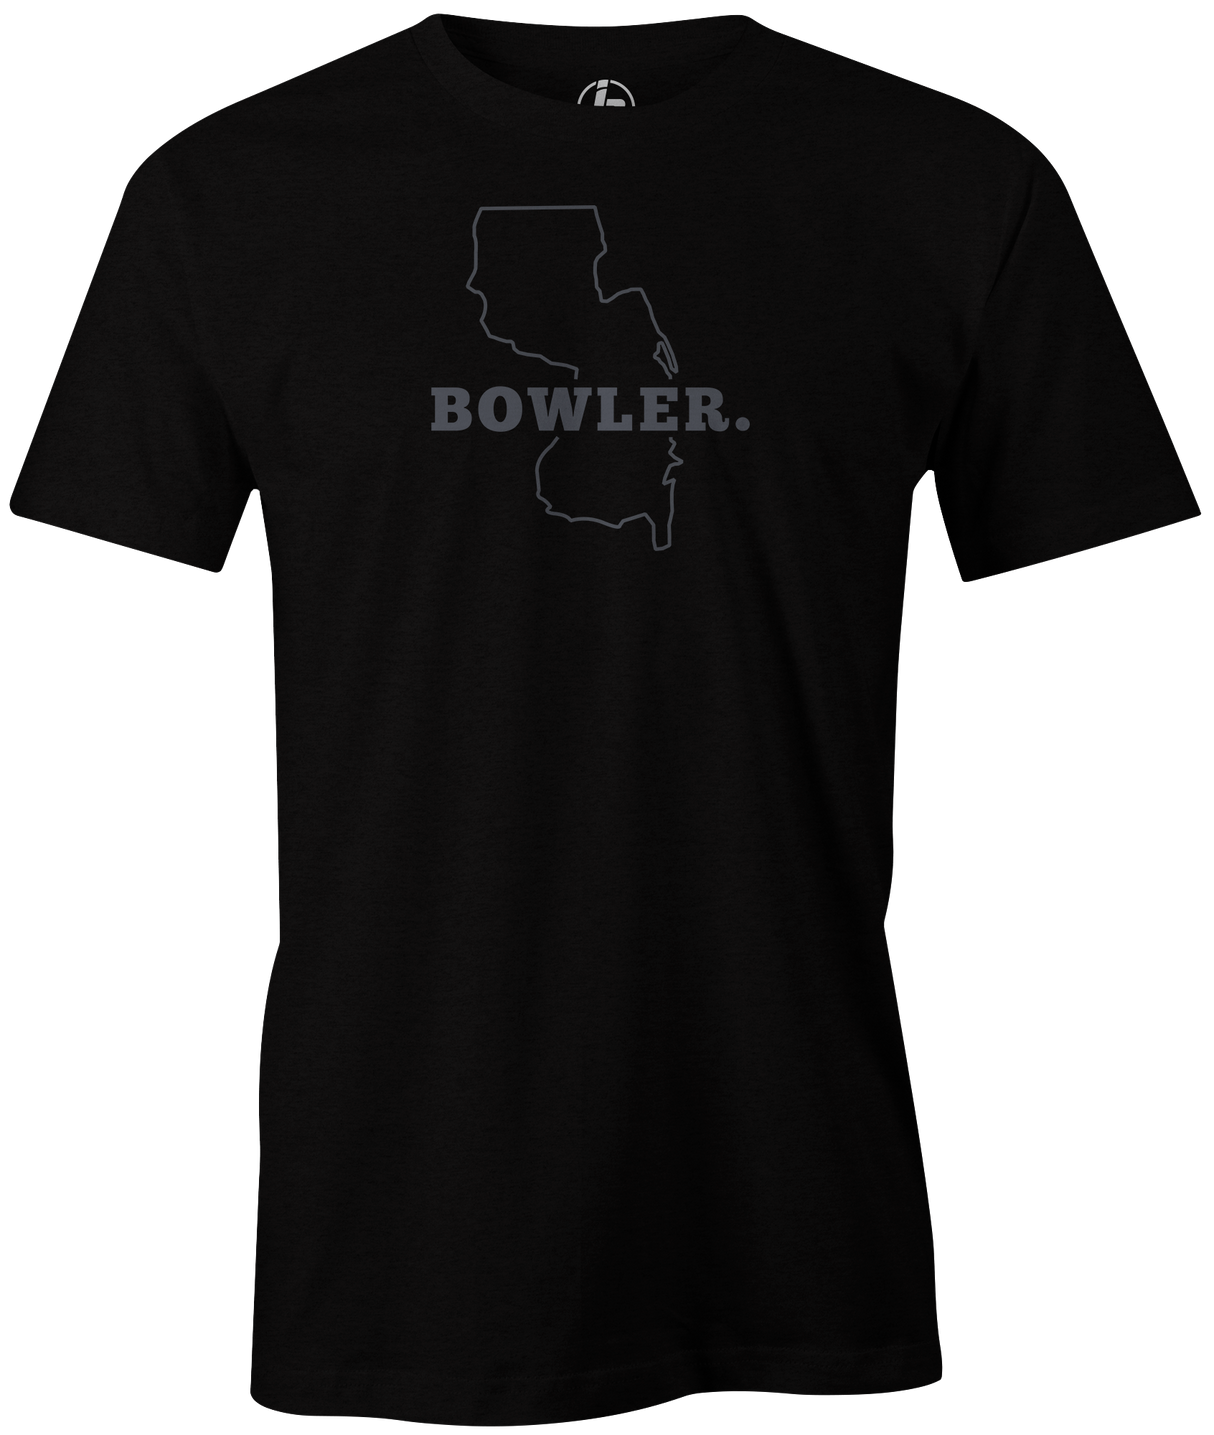 New Jersey State Men's Bowling T-shirt, Black, Cool, novelty, tshirt, tee, tee-shirt, tee shirt, teeshirt, team, comfortable